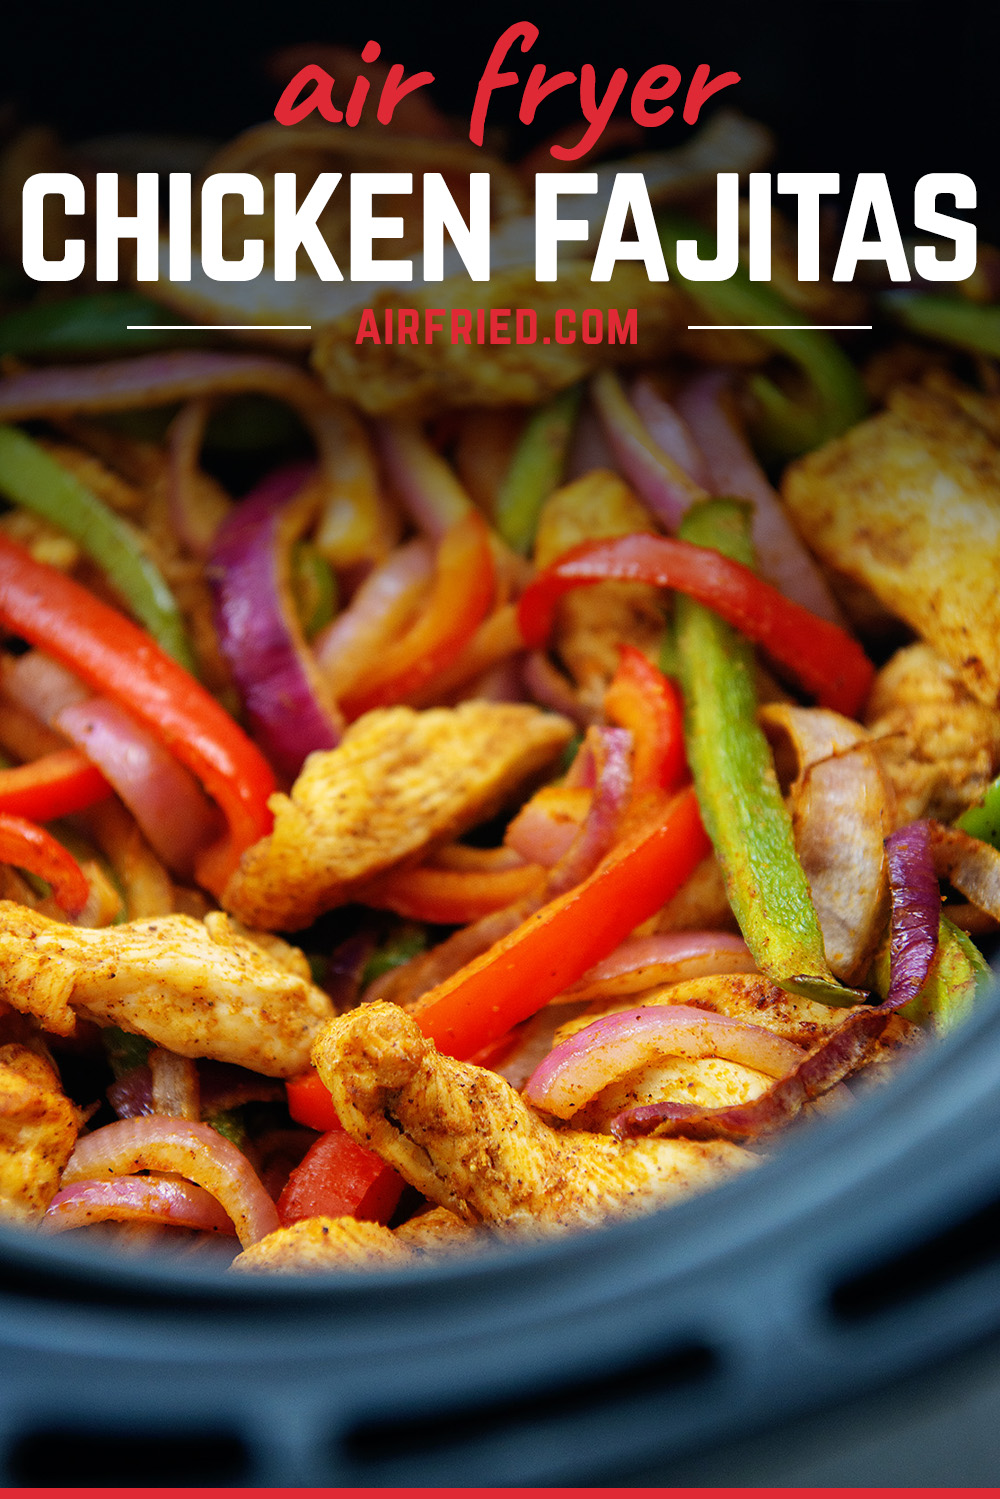 This air fryer chicken fajita recipe only takes 15 minutes and the end result is magnificent!